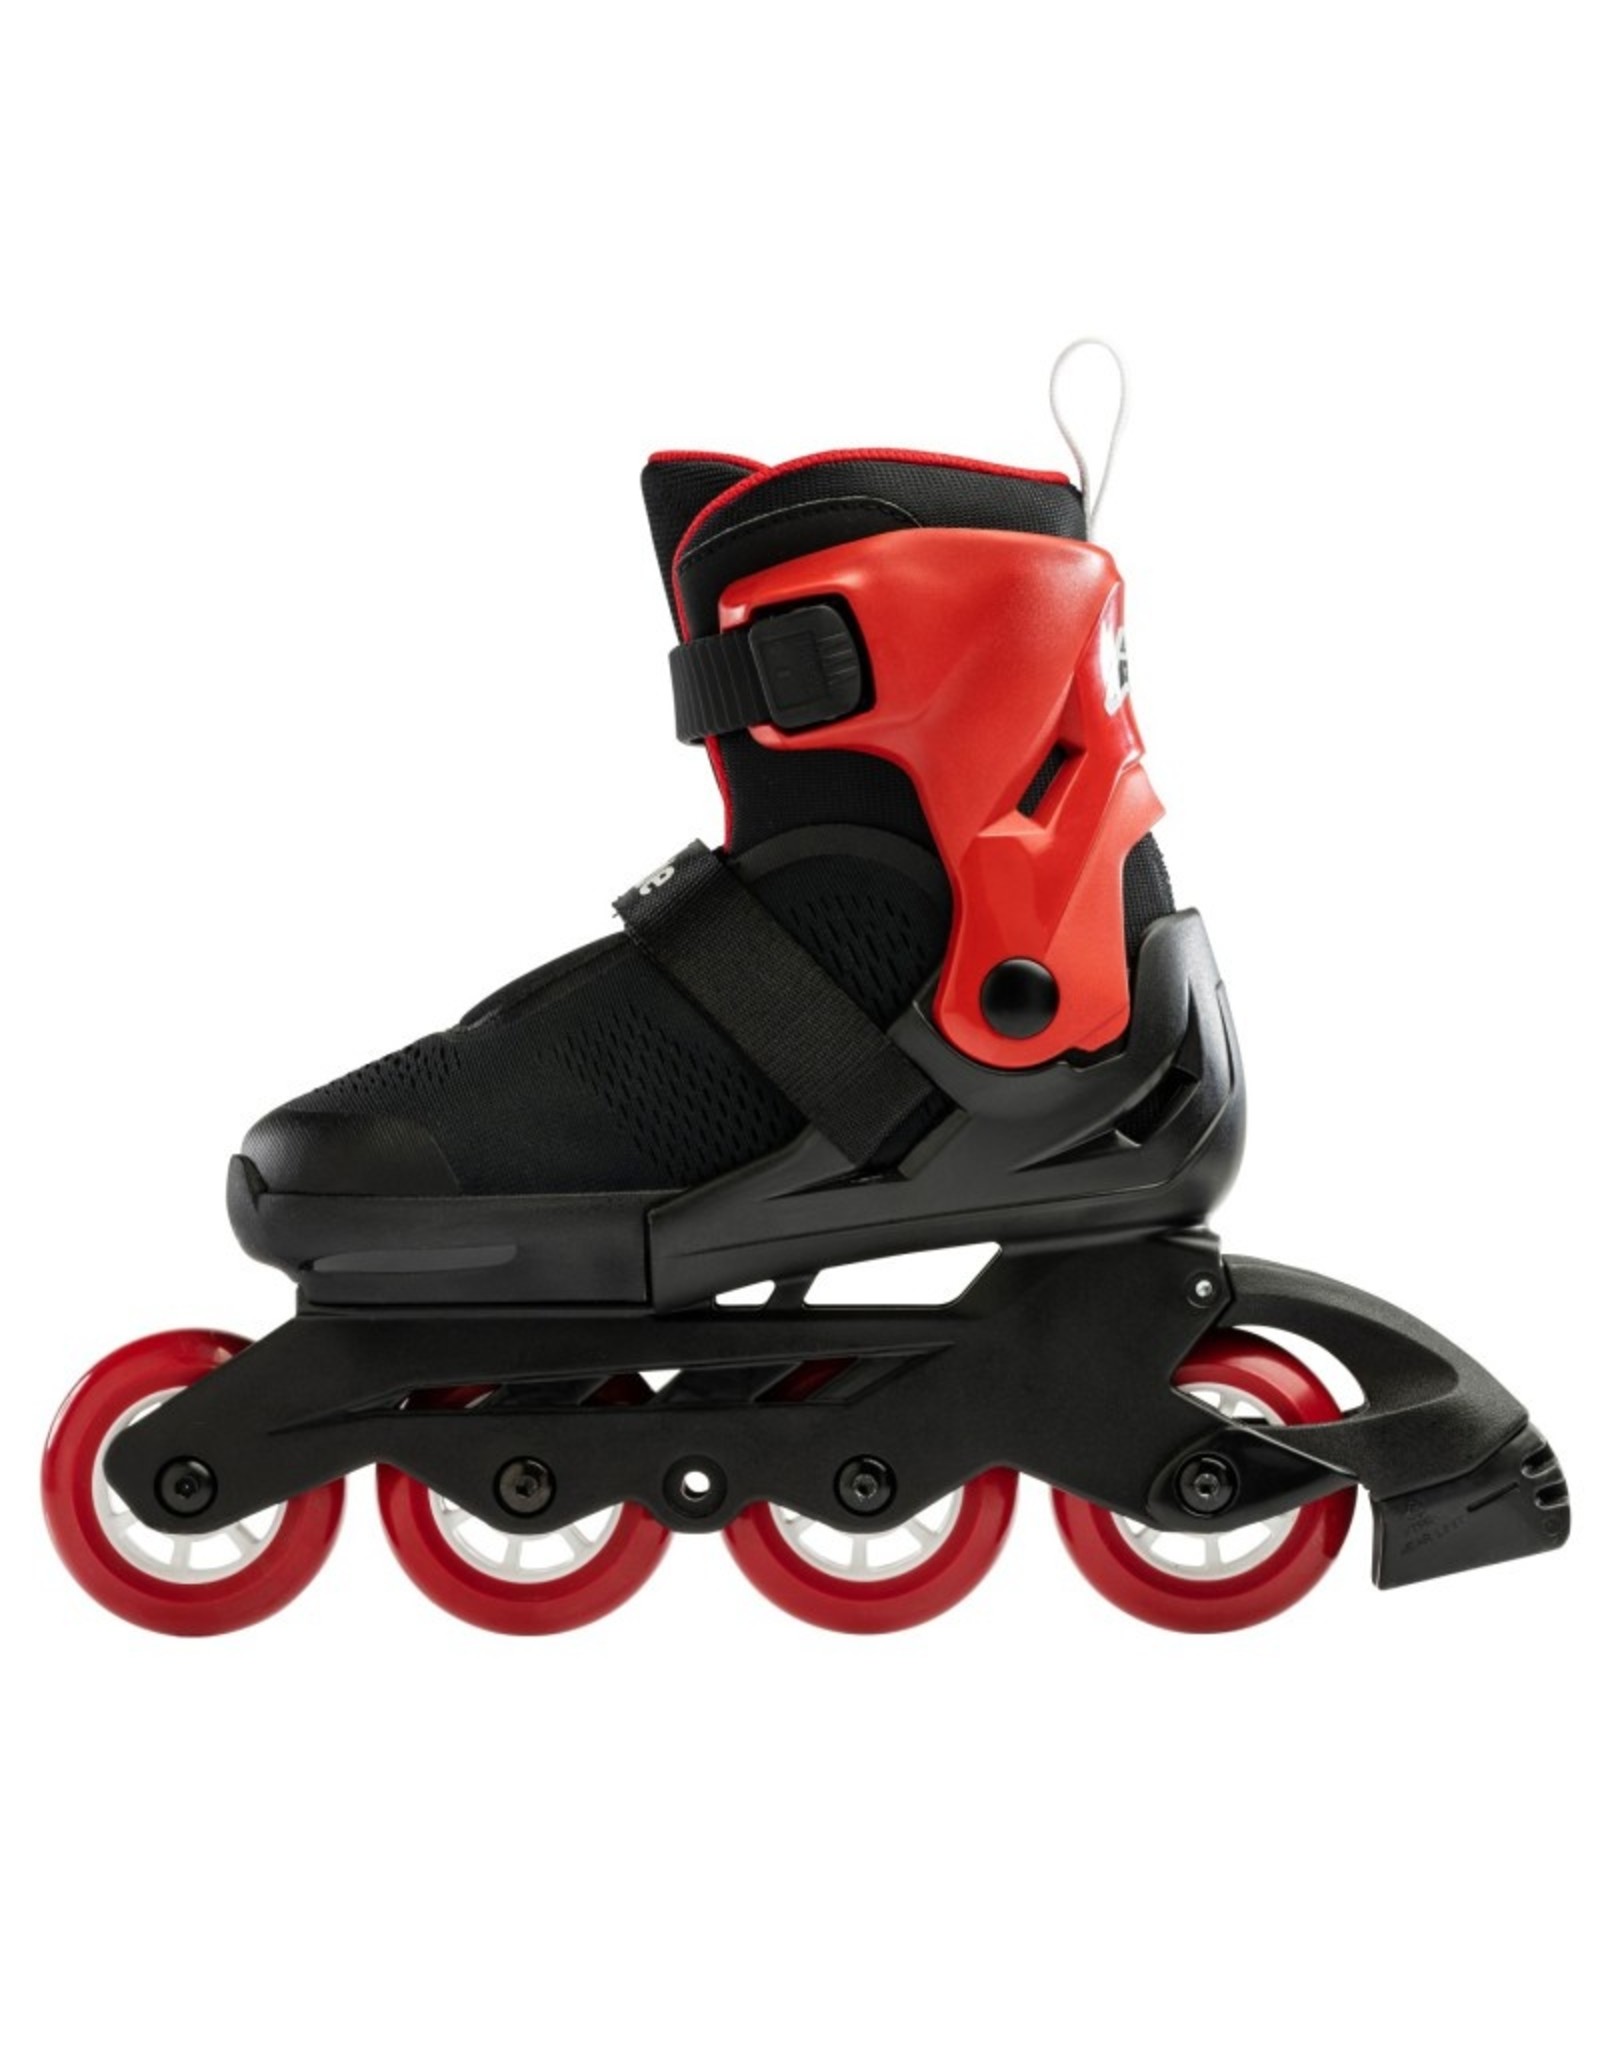 Rollerblade Rollerblade Microblade Free black/red